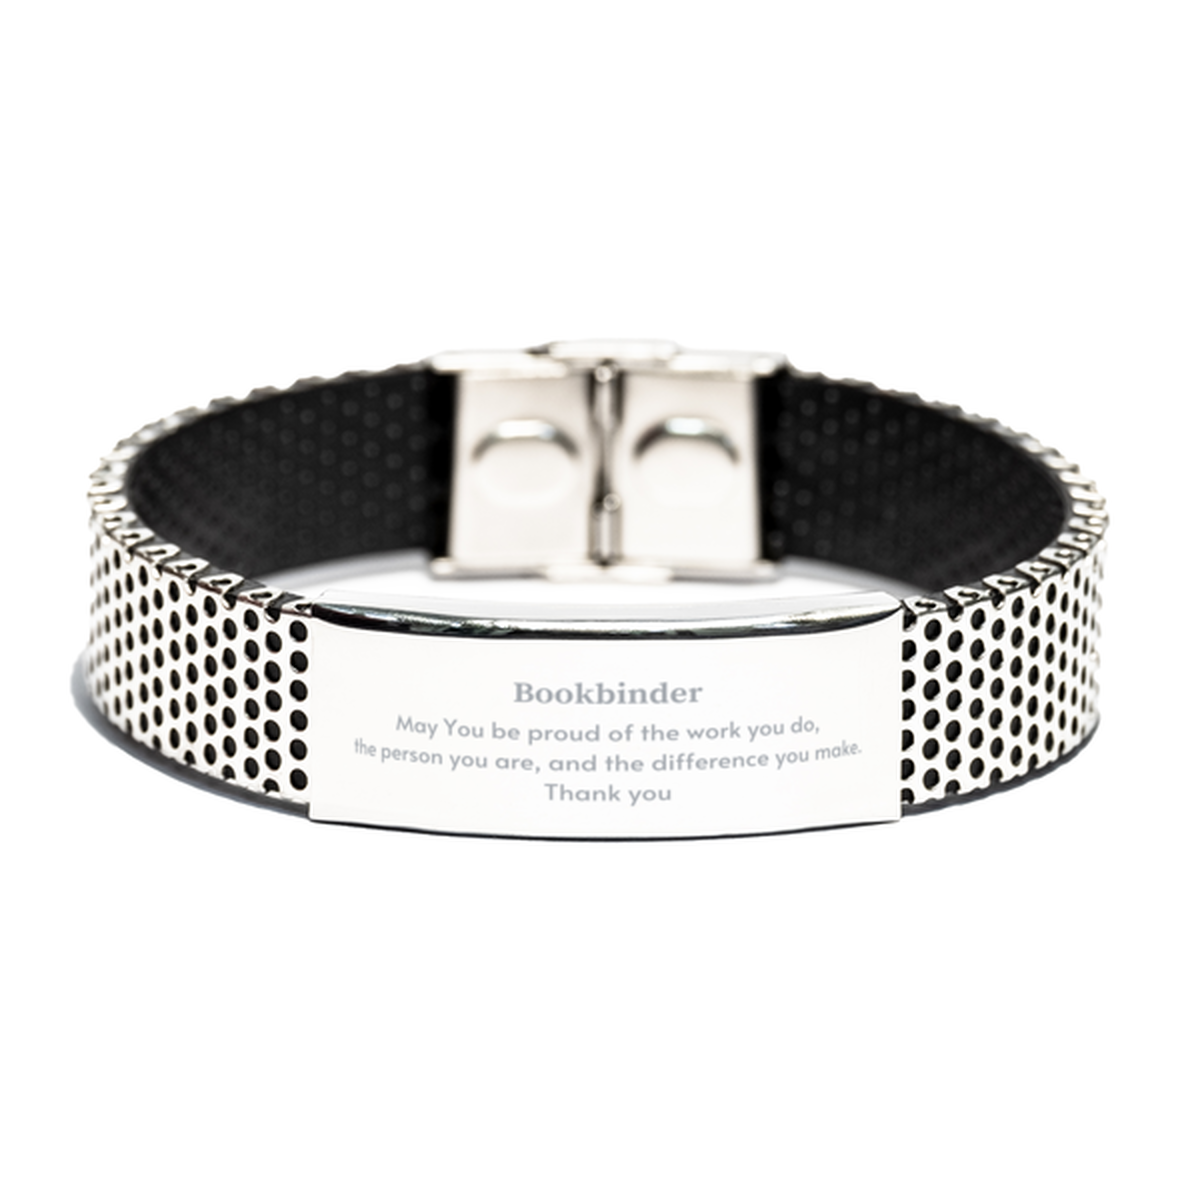 Heartwarming Stainless Steel Bracelet Retirement Coworkers Gifts for Bookbinder, Bookbinder May You be proud of the work you do, the person you are Gifts for Boss Men Women Friends